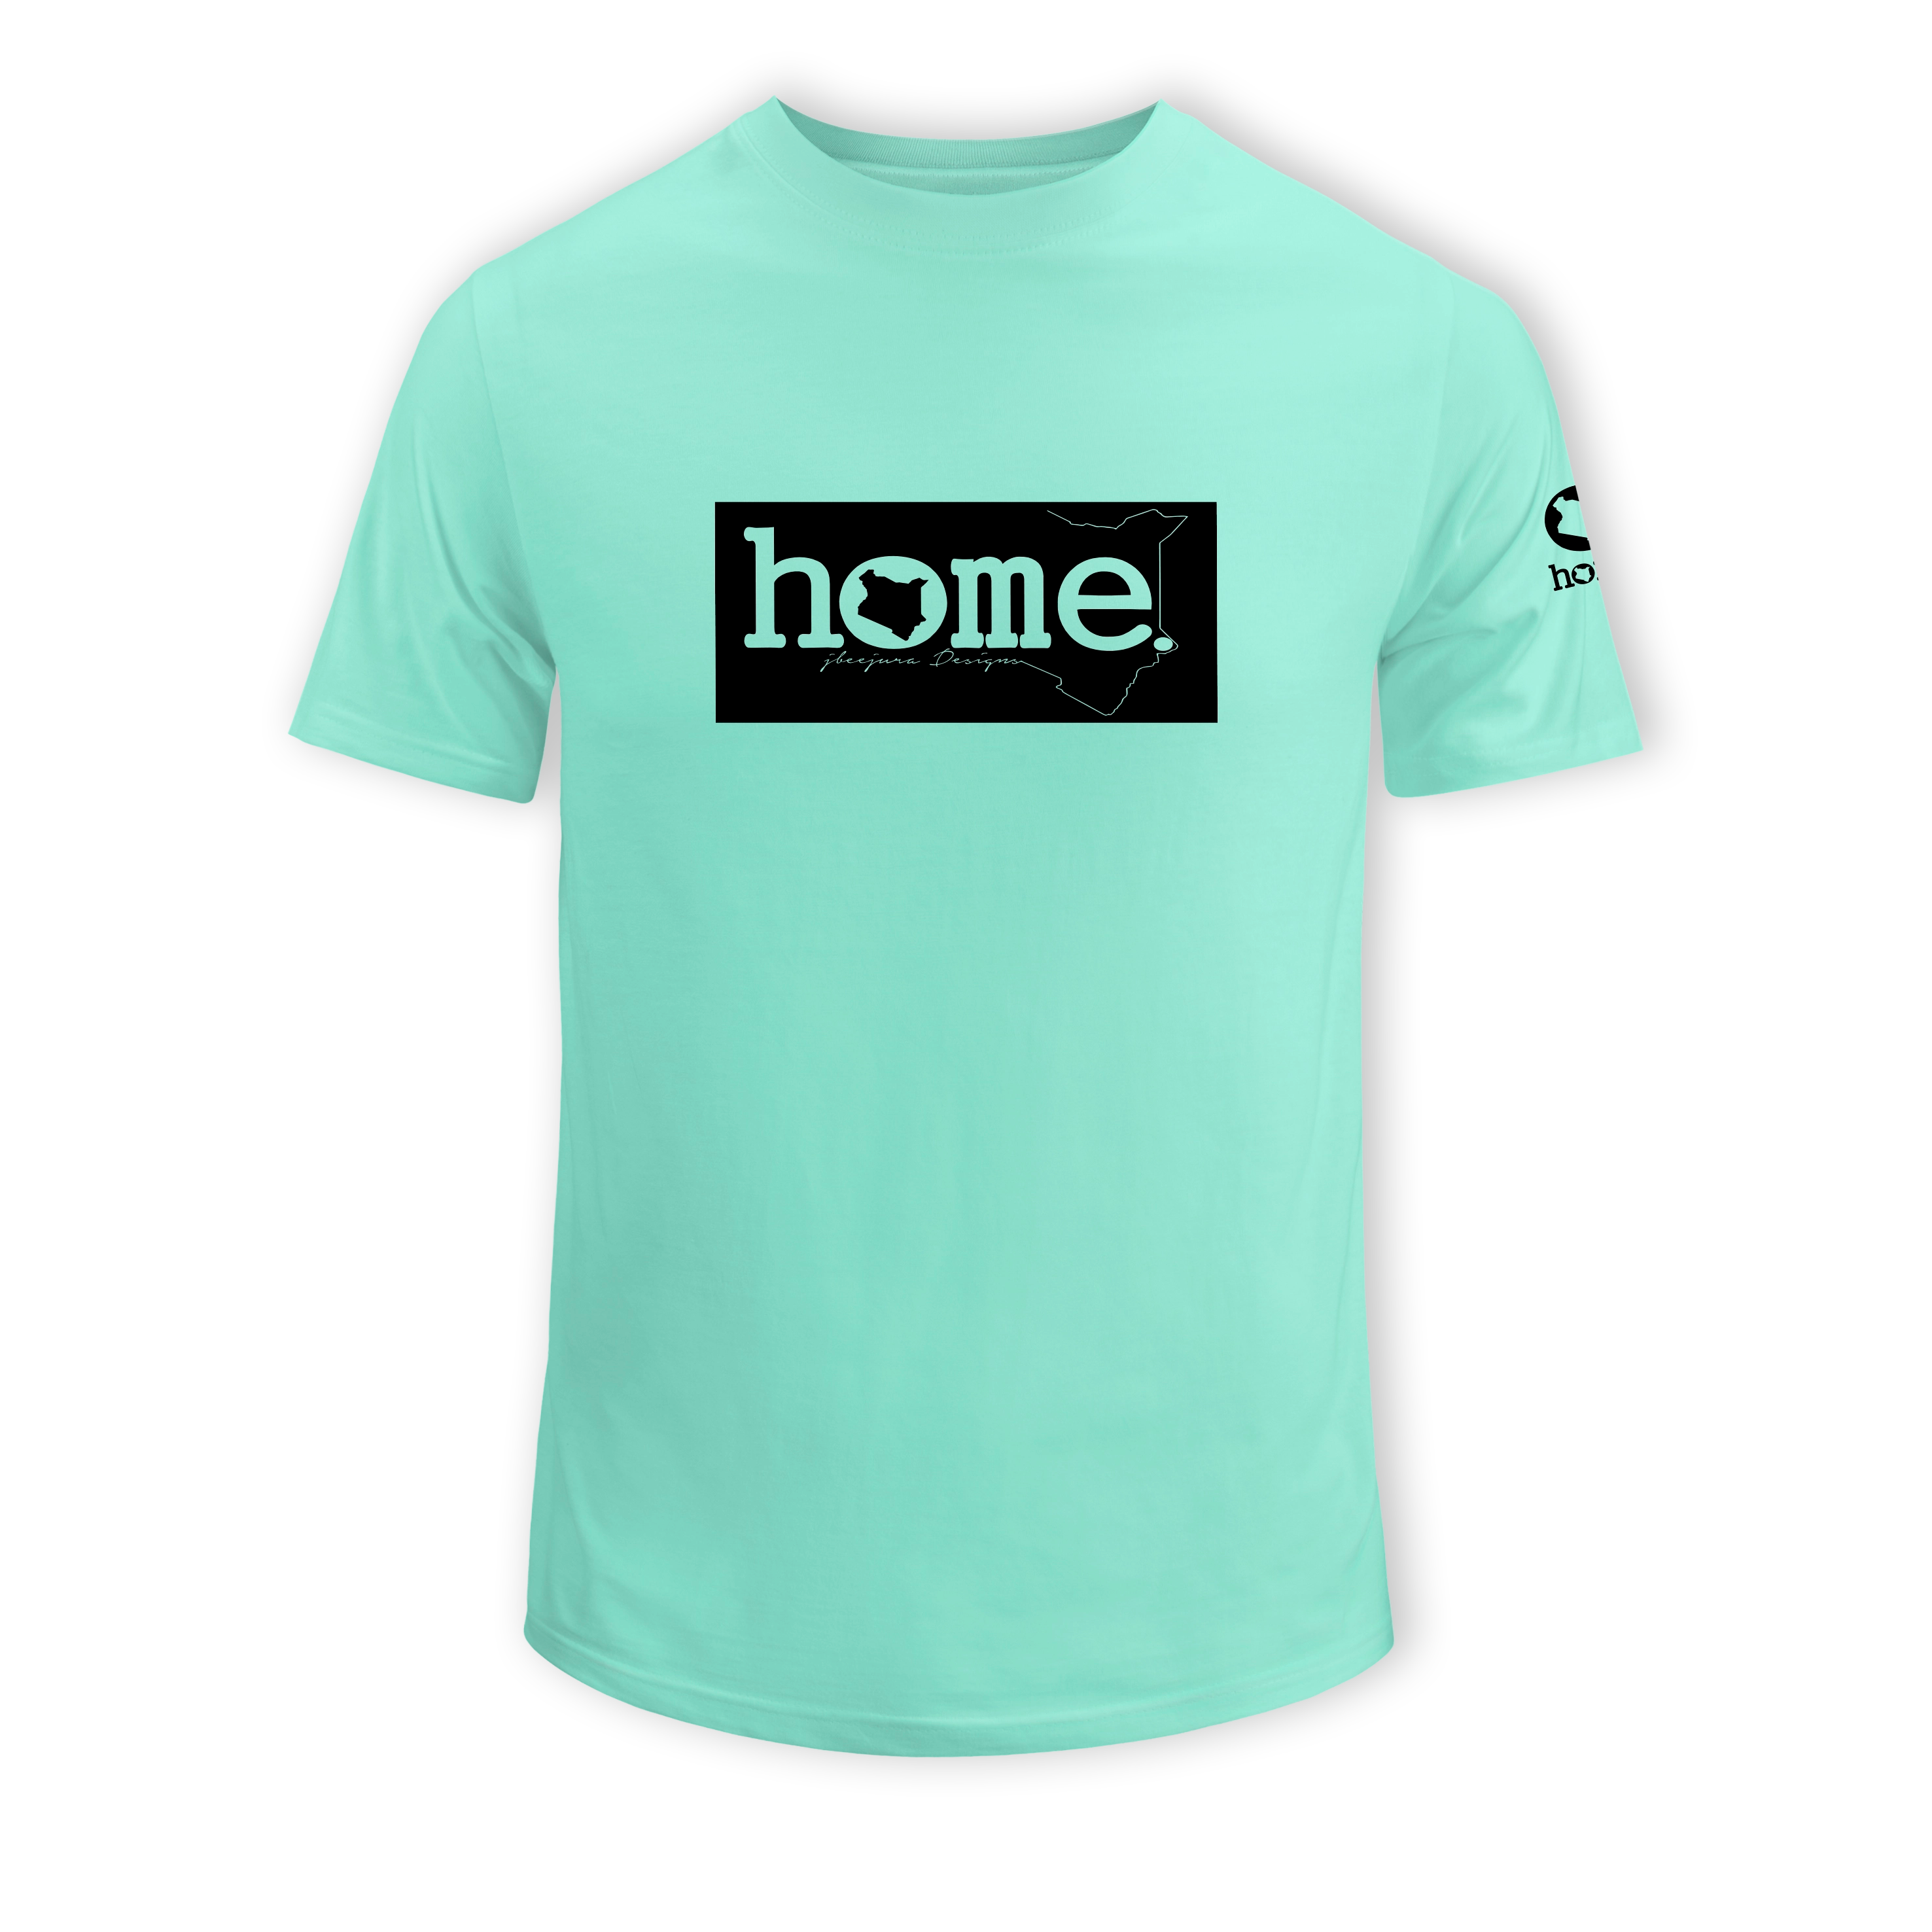 home_254 KIDS SHORT-SLEEVED TURQUOISE GREEN T-SHIRT WITH A BLACK CLASSIC PRINT – COTTON PLUS FABRIC